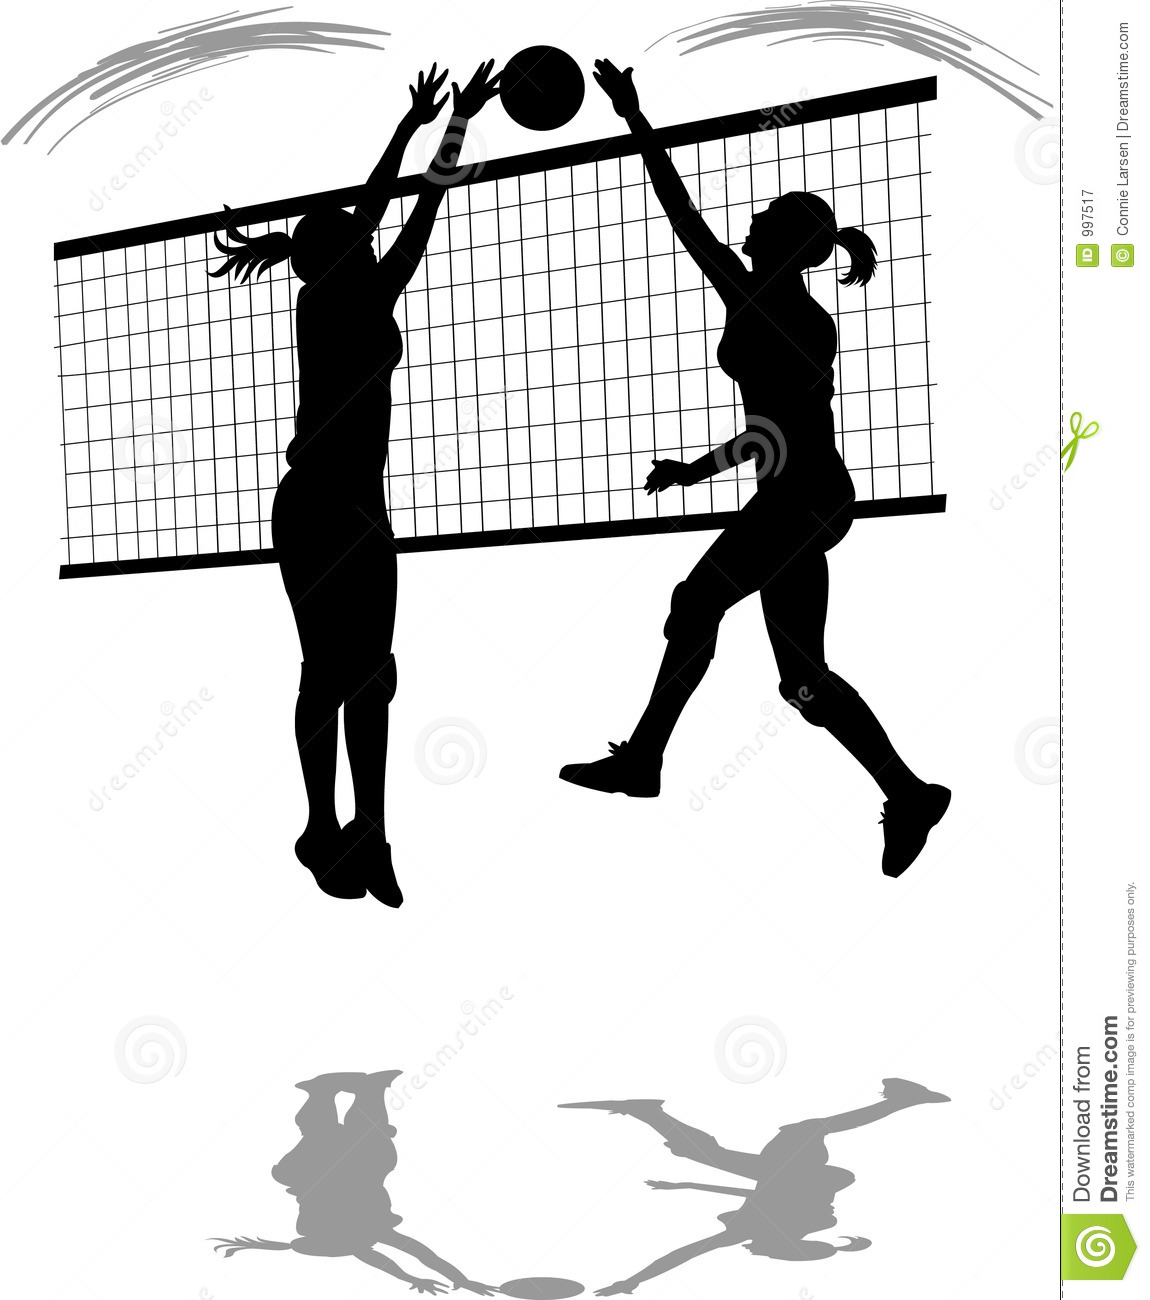 Volleyball Spike Block Royalty Free Stock Photography   Image  997517